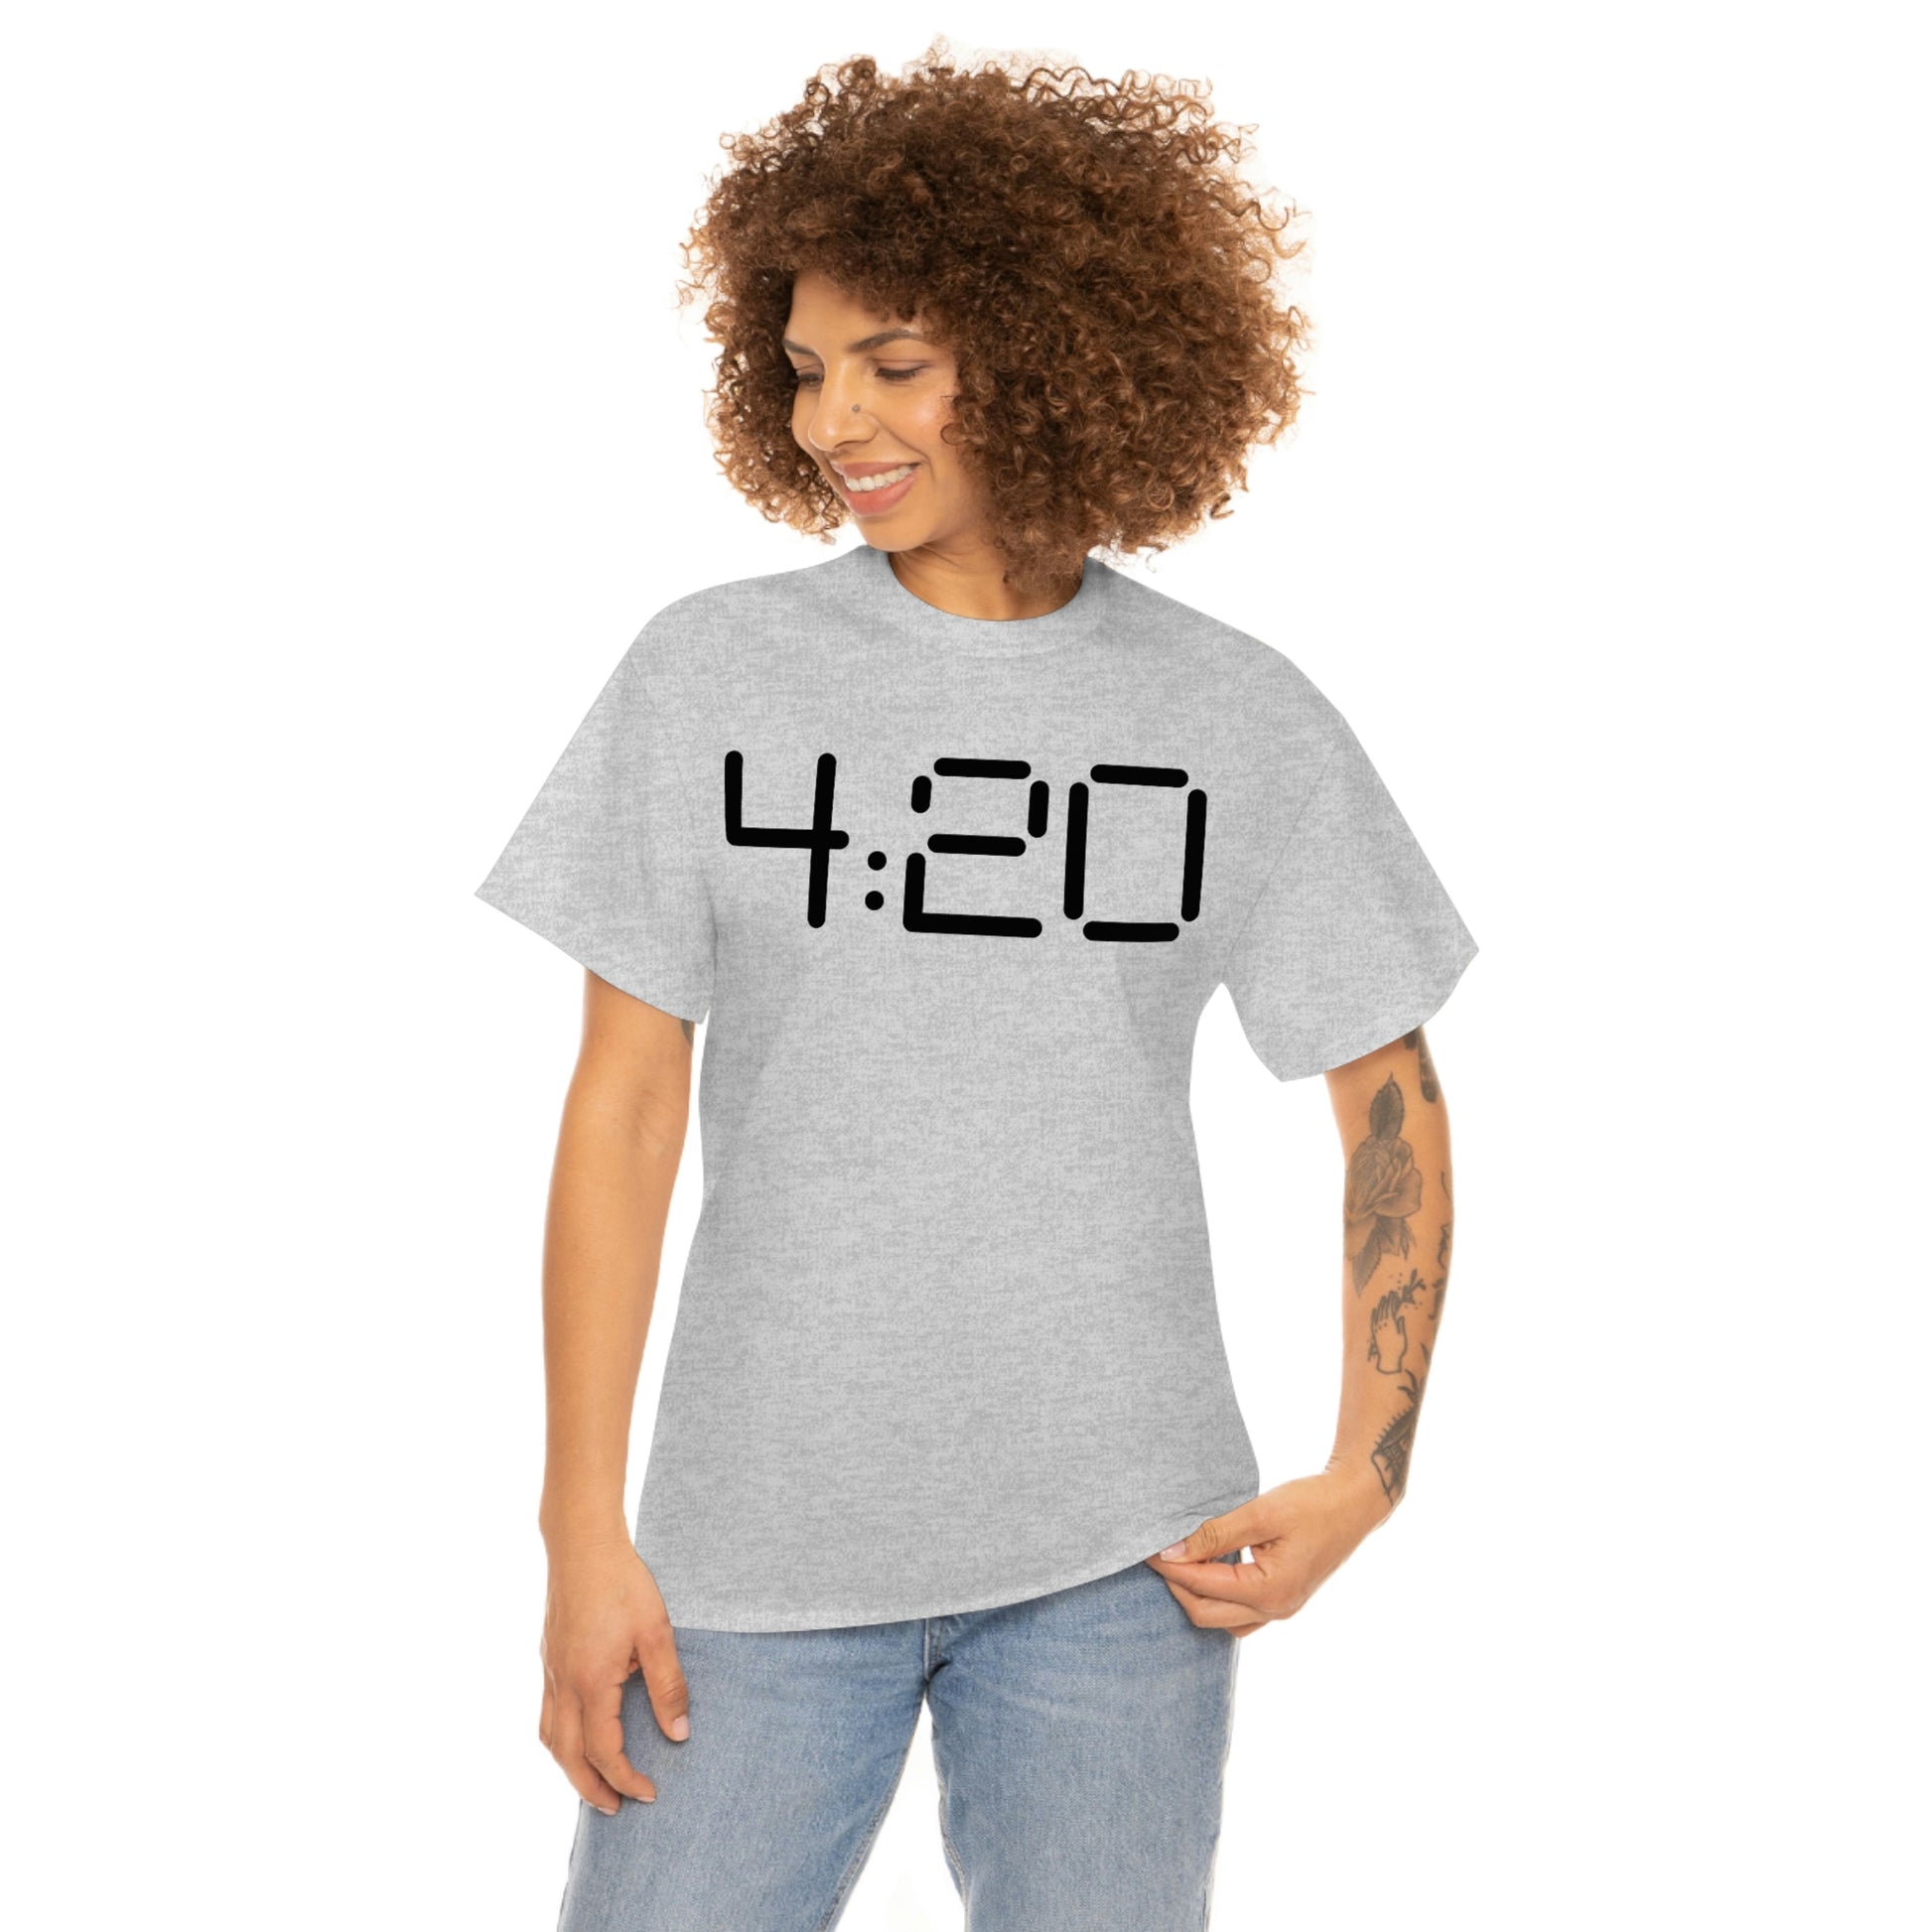 a woman wearing a grey 420 Stoner Weed T-Shirt.